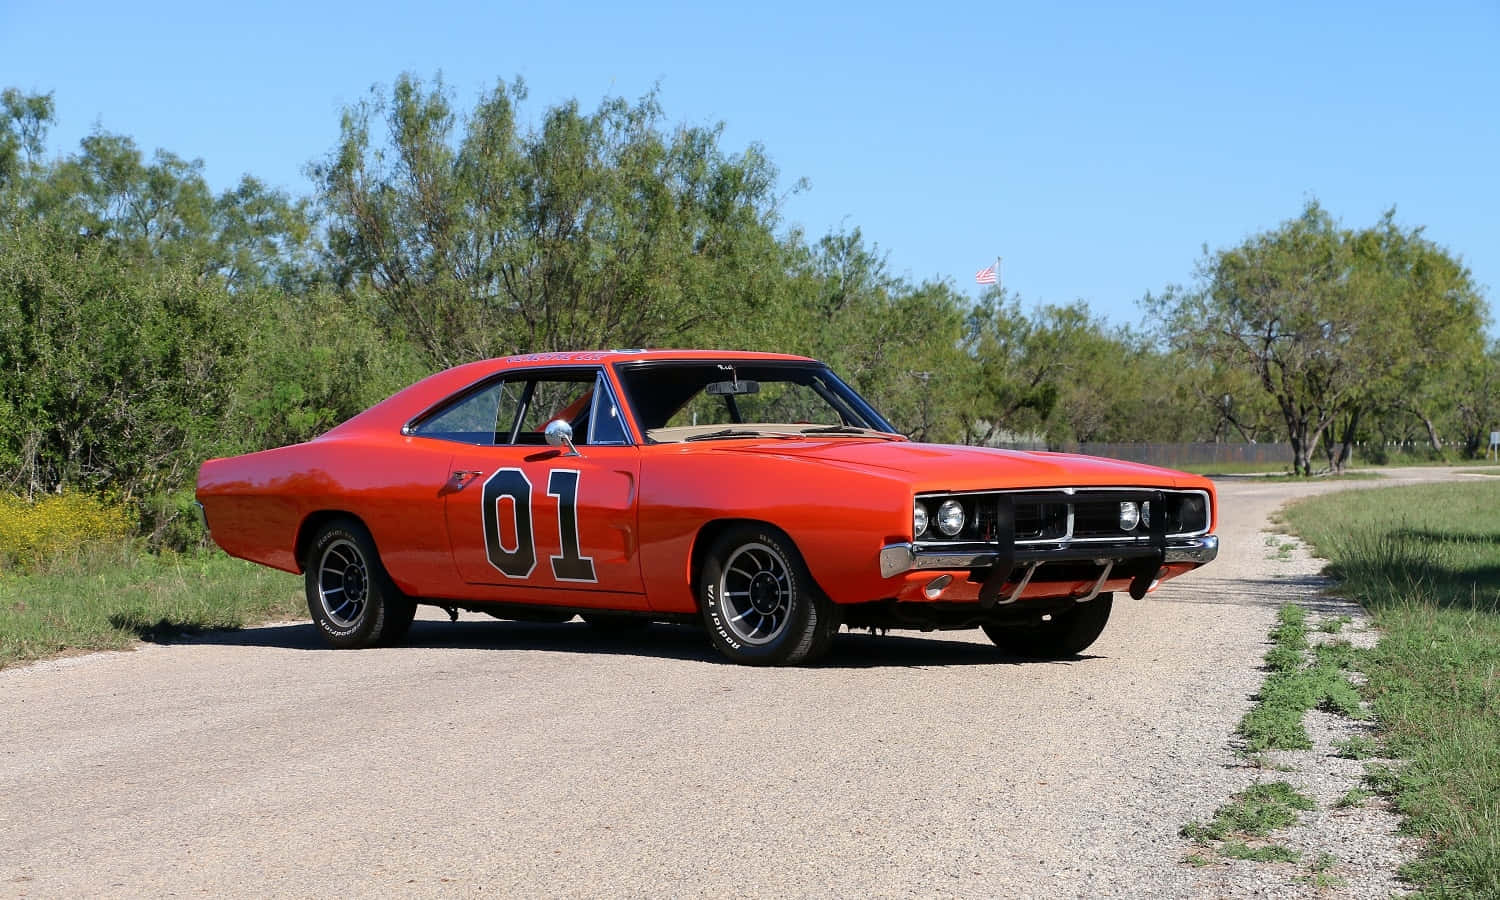 Download An Orange Muscle Car Is Driving Down A Dirt Road Wallpaper ...